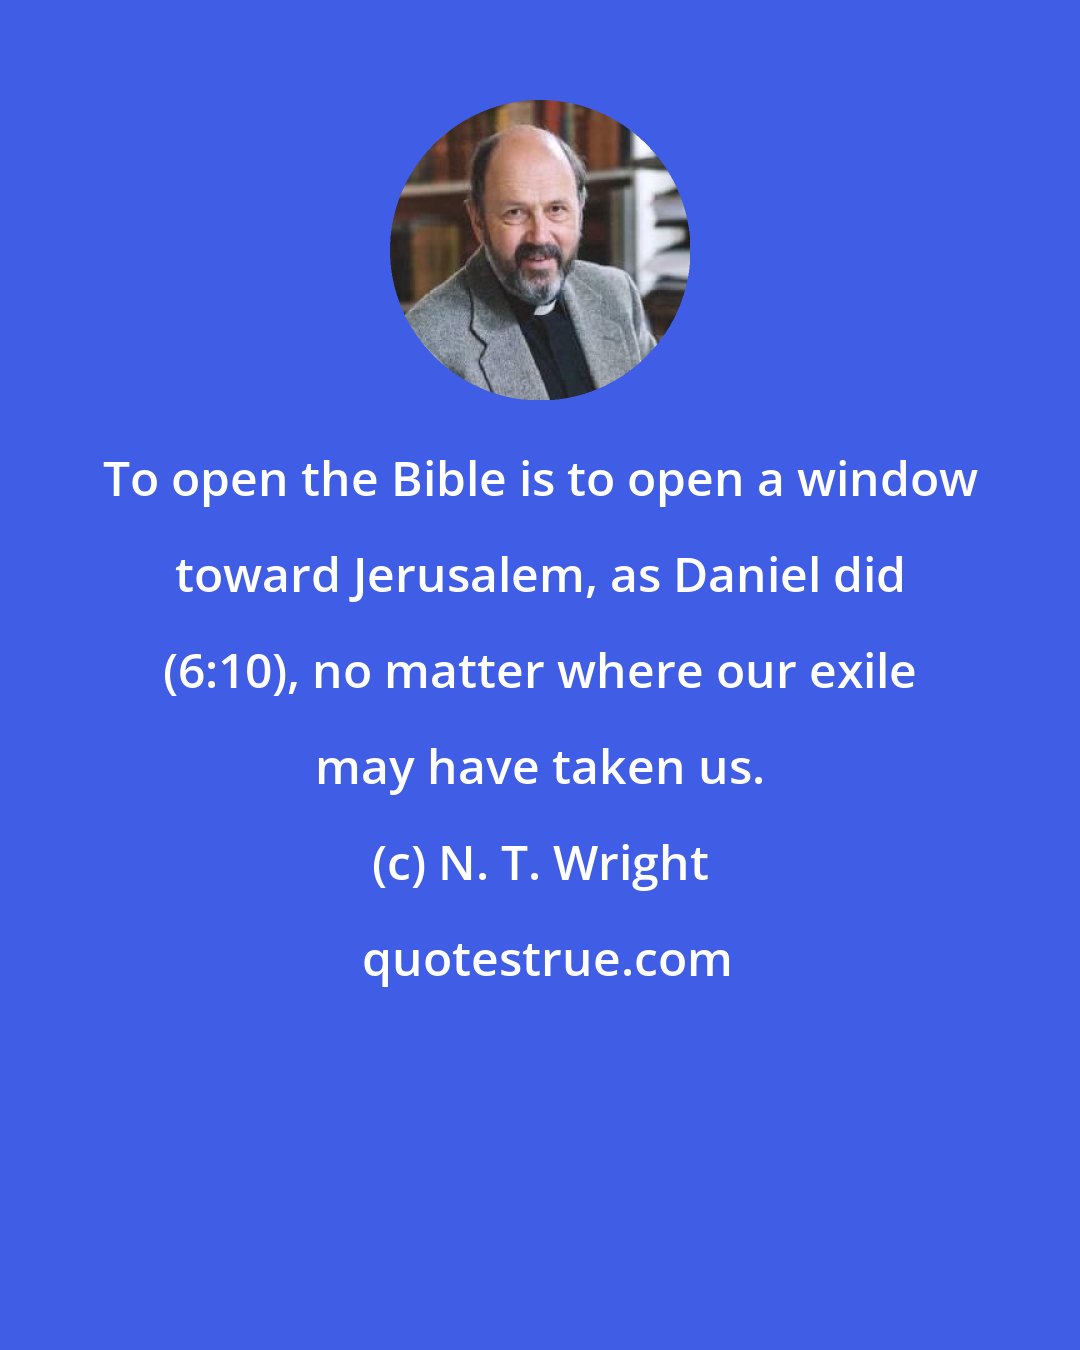 N. T. Wright: To open the Bible is to open a window toward Jerusalem, as Daniel did (6:10), no matter where our exile may have taken us.